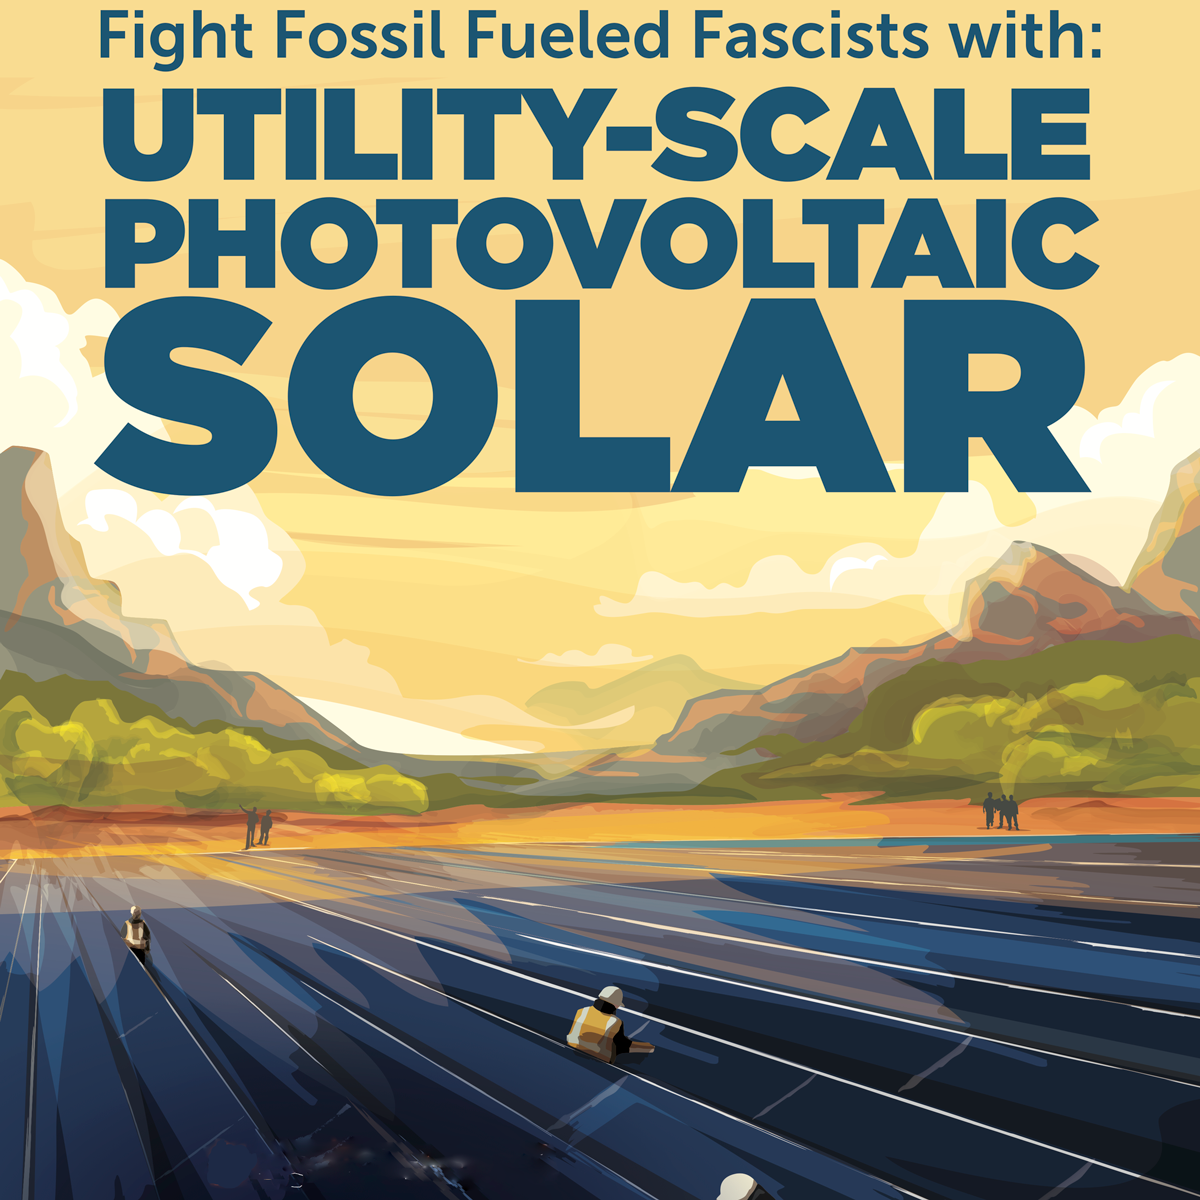 Fight fossil fascists with solar energy